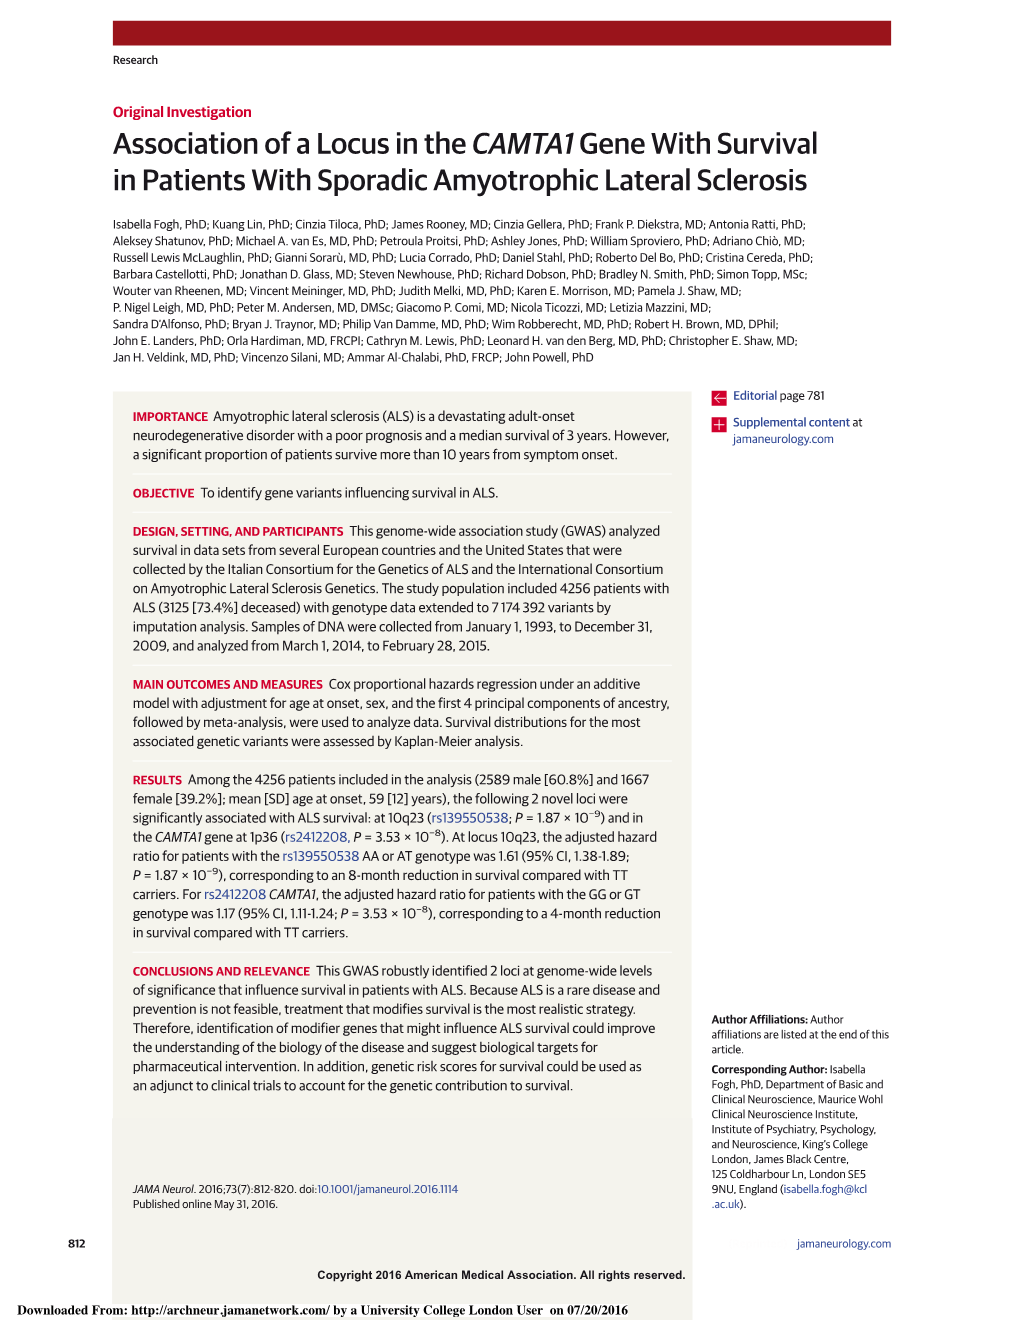 Association of a Locus in the CAMTA1 Gene with Survival in Patients with Sporadic Amyotrophic Lateral Sclerosis